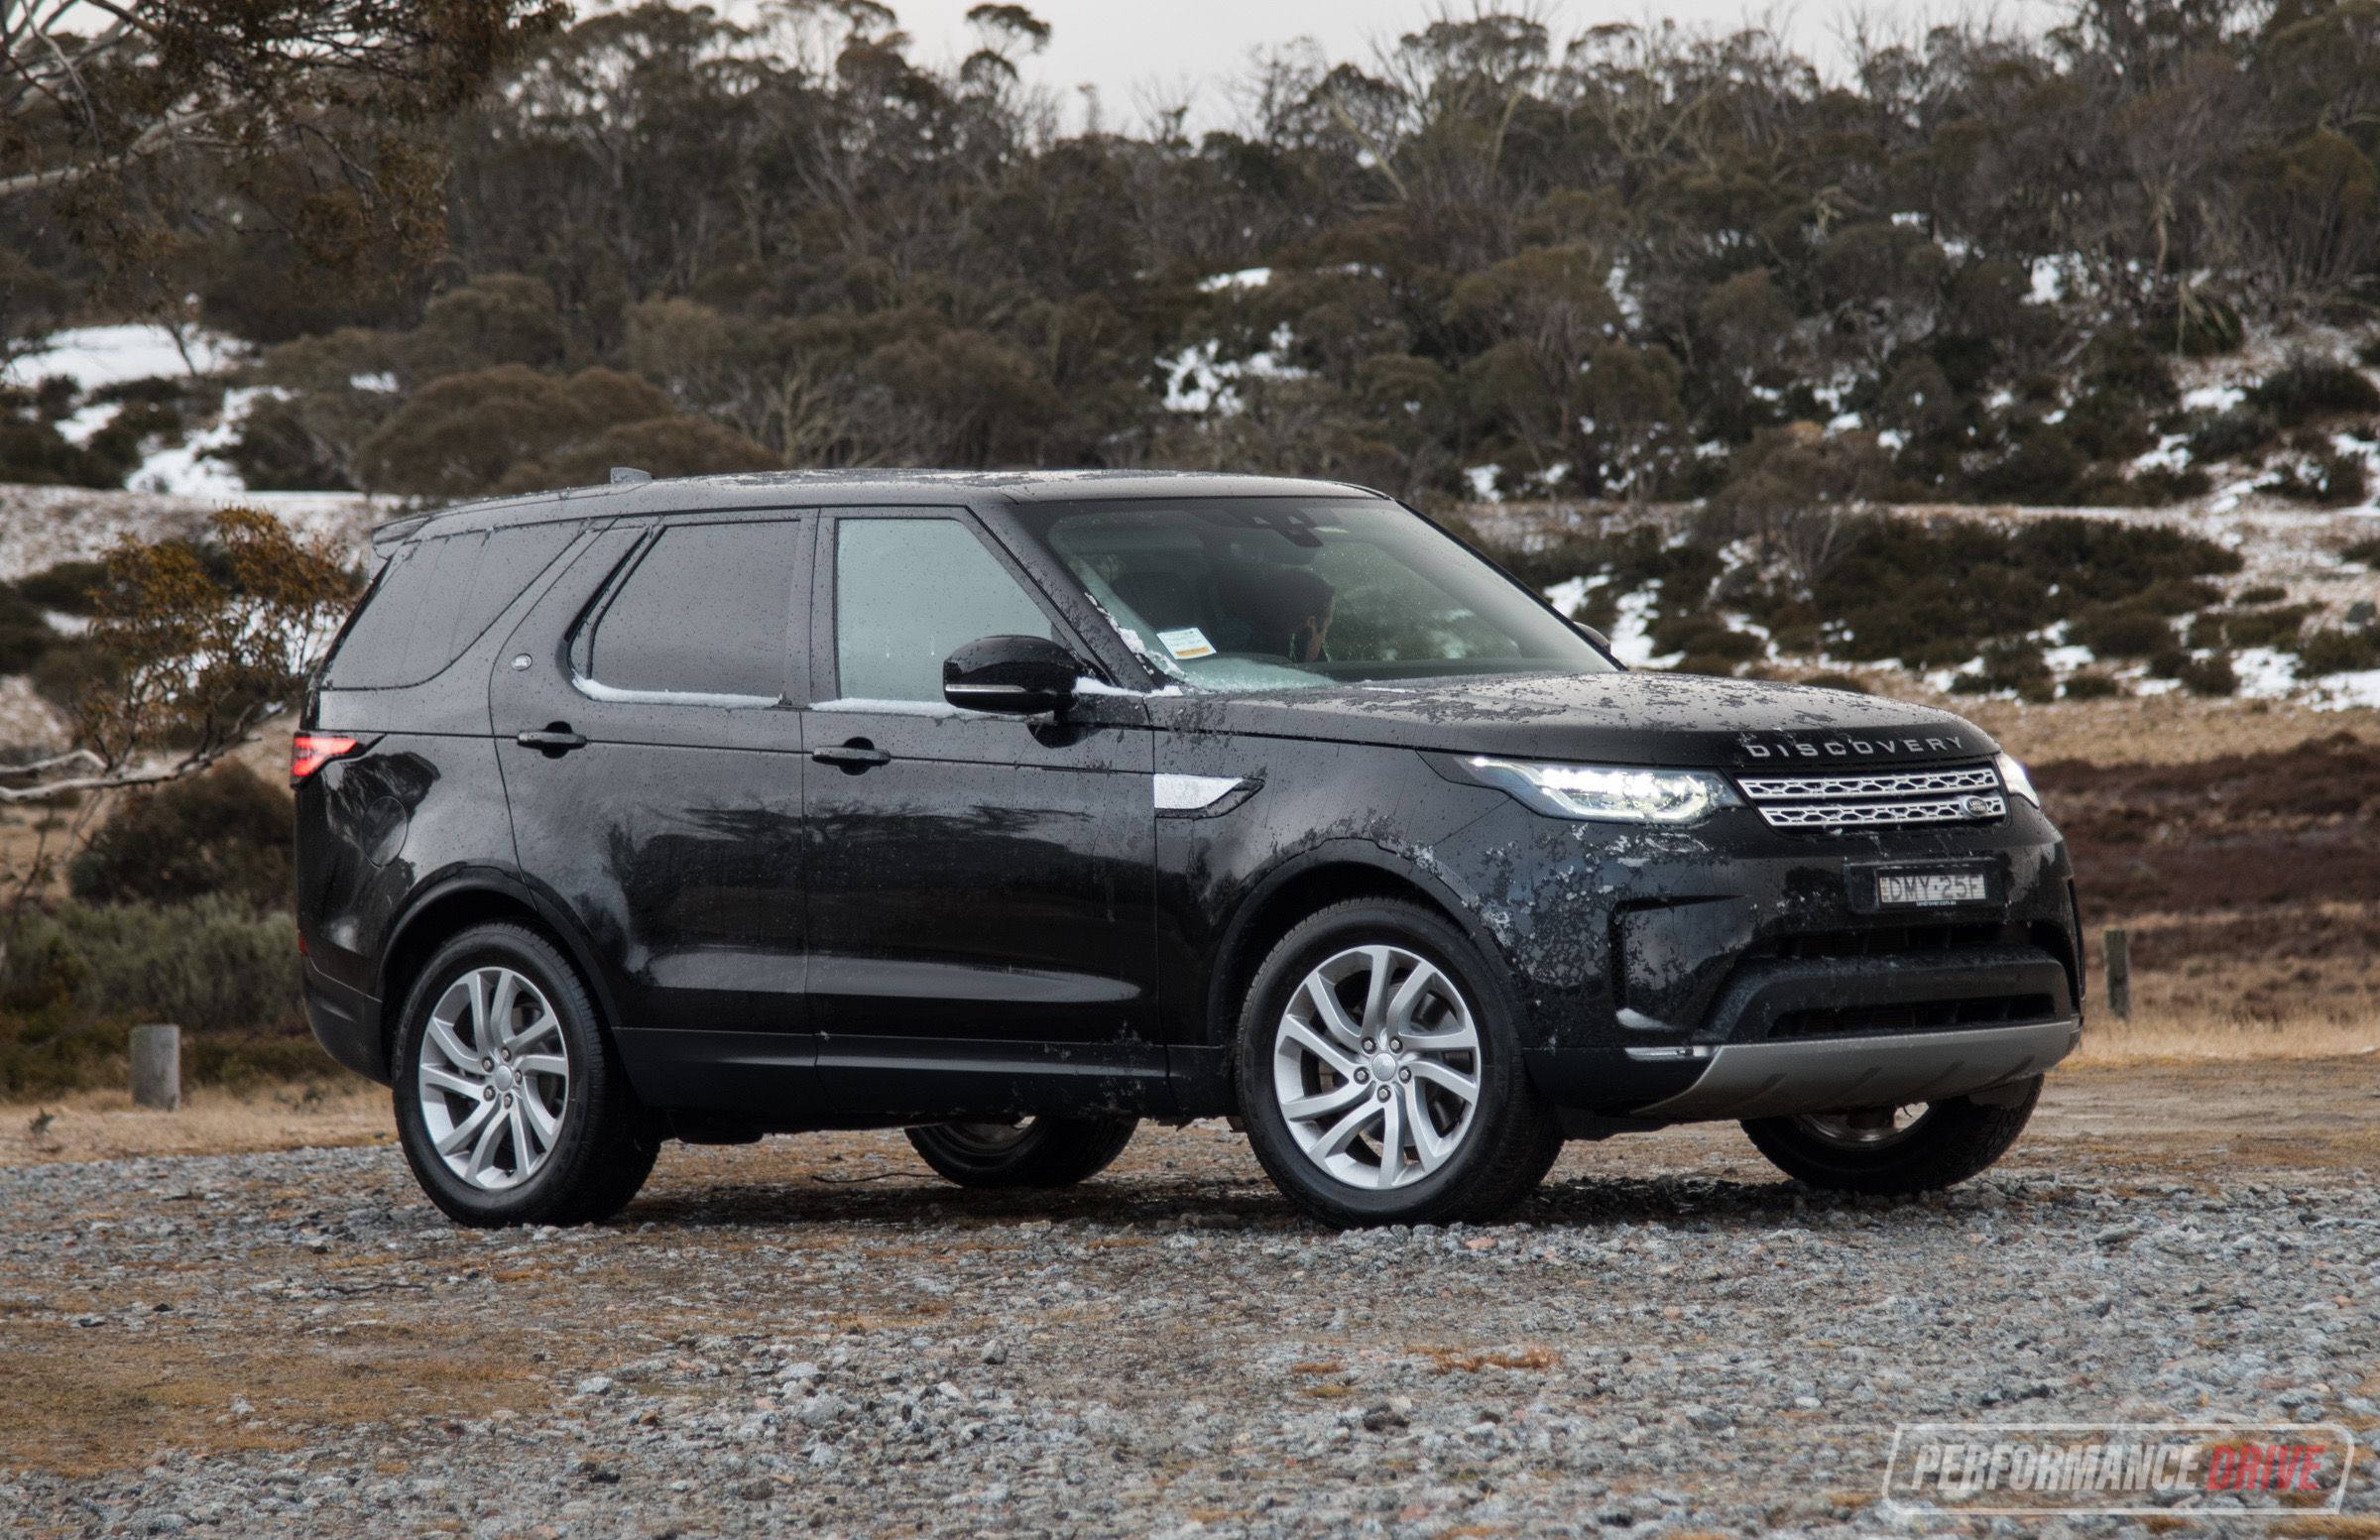 2017 Land Rover Discovery Sd4 Hse Review Video Performancedrive